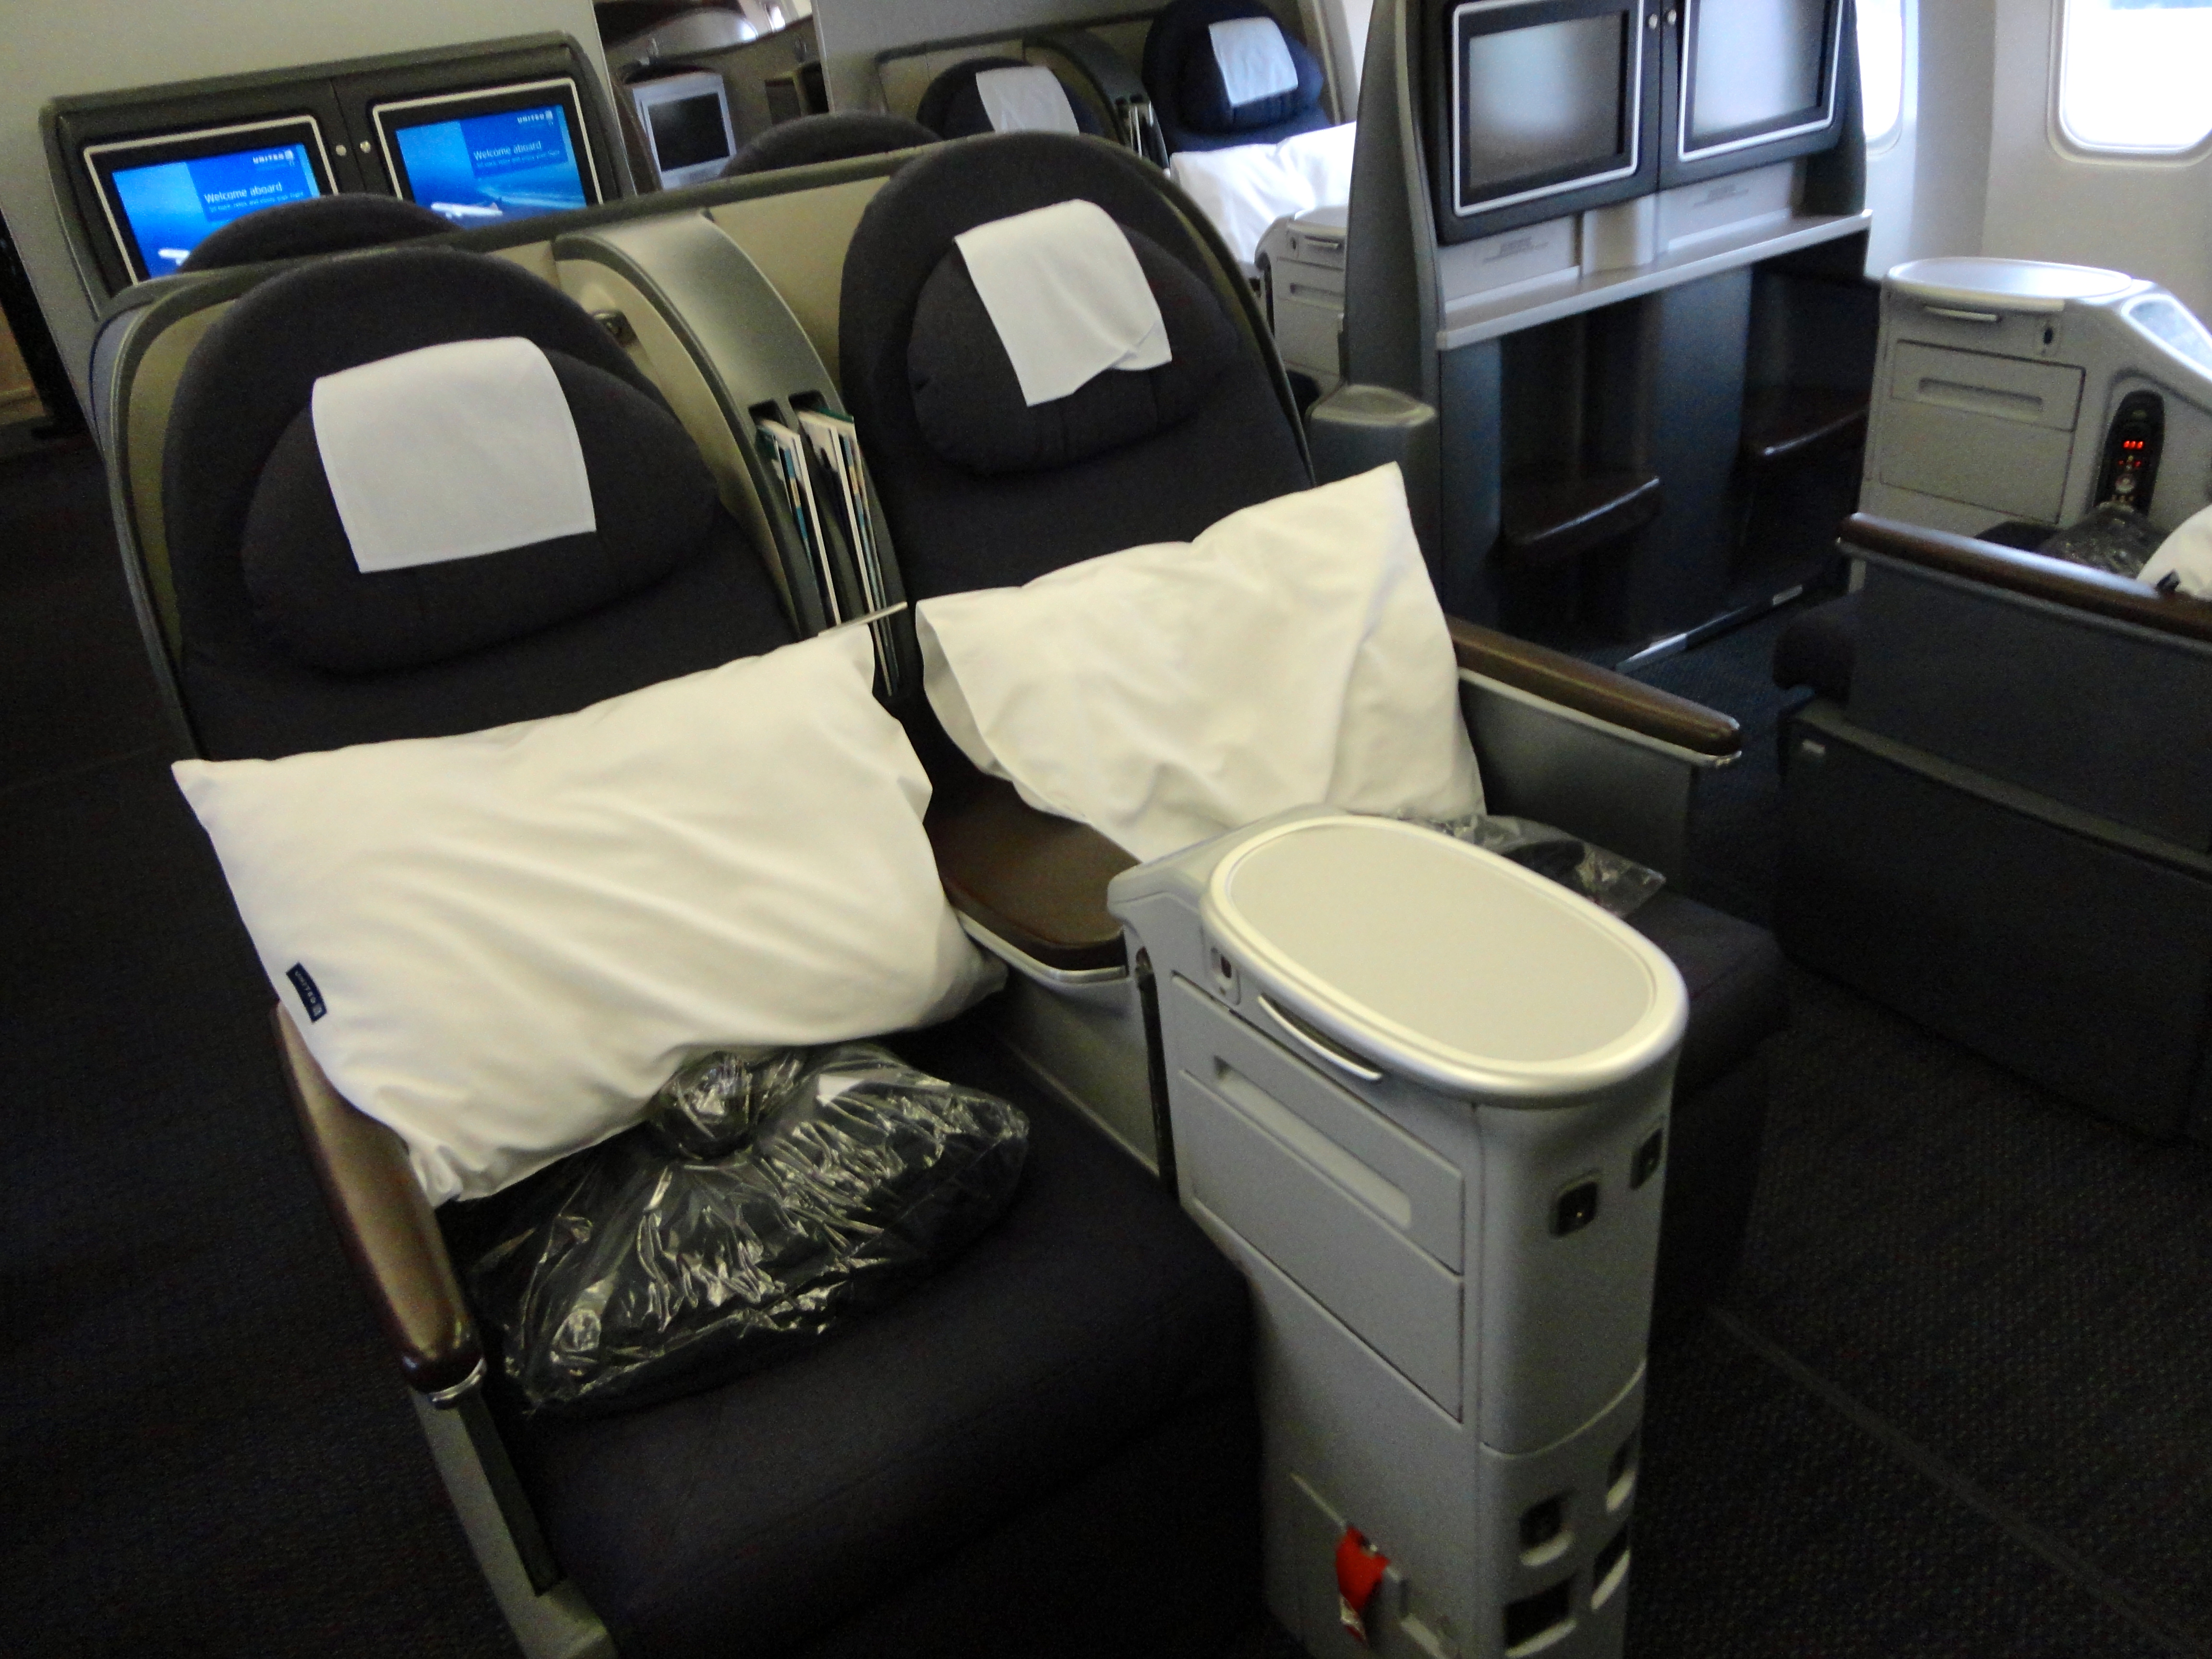 United Business Class Seat